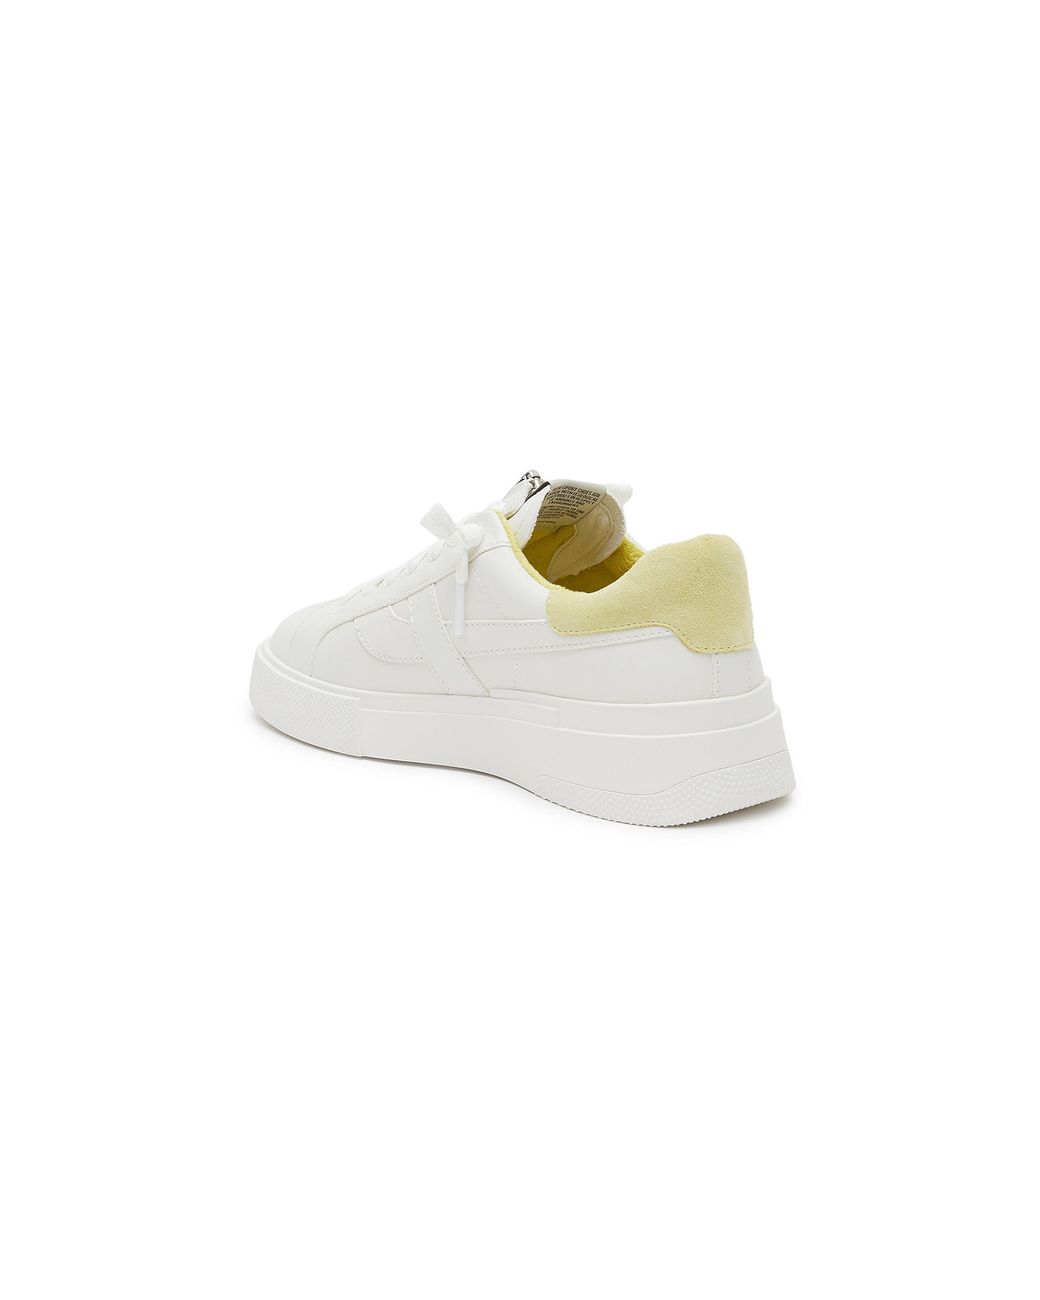 Ash Lace Flam' Low Top Logo Zipper Sneakers Women Shoes Sneakers Low-top  Flam' Low Top Logo Zipper Sneakers in White - Lyst